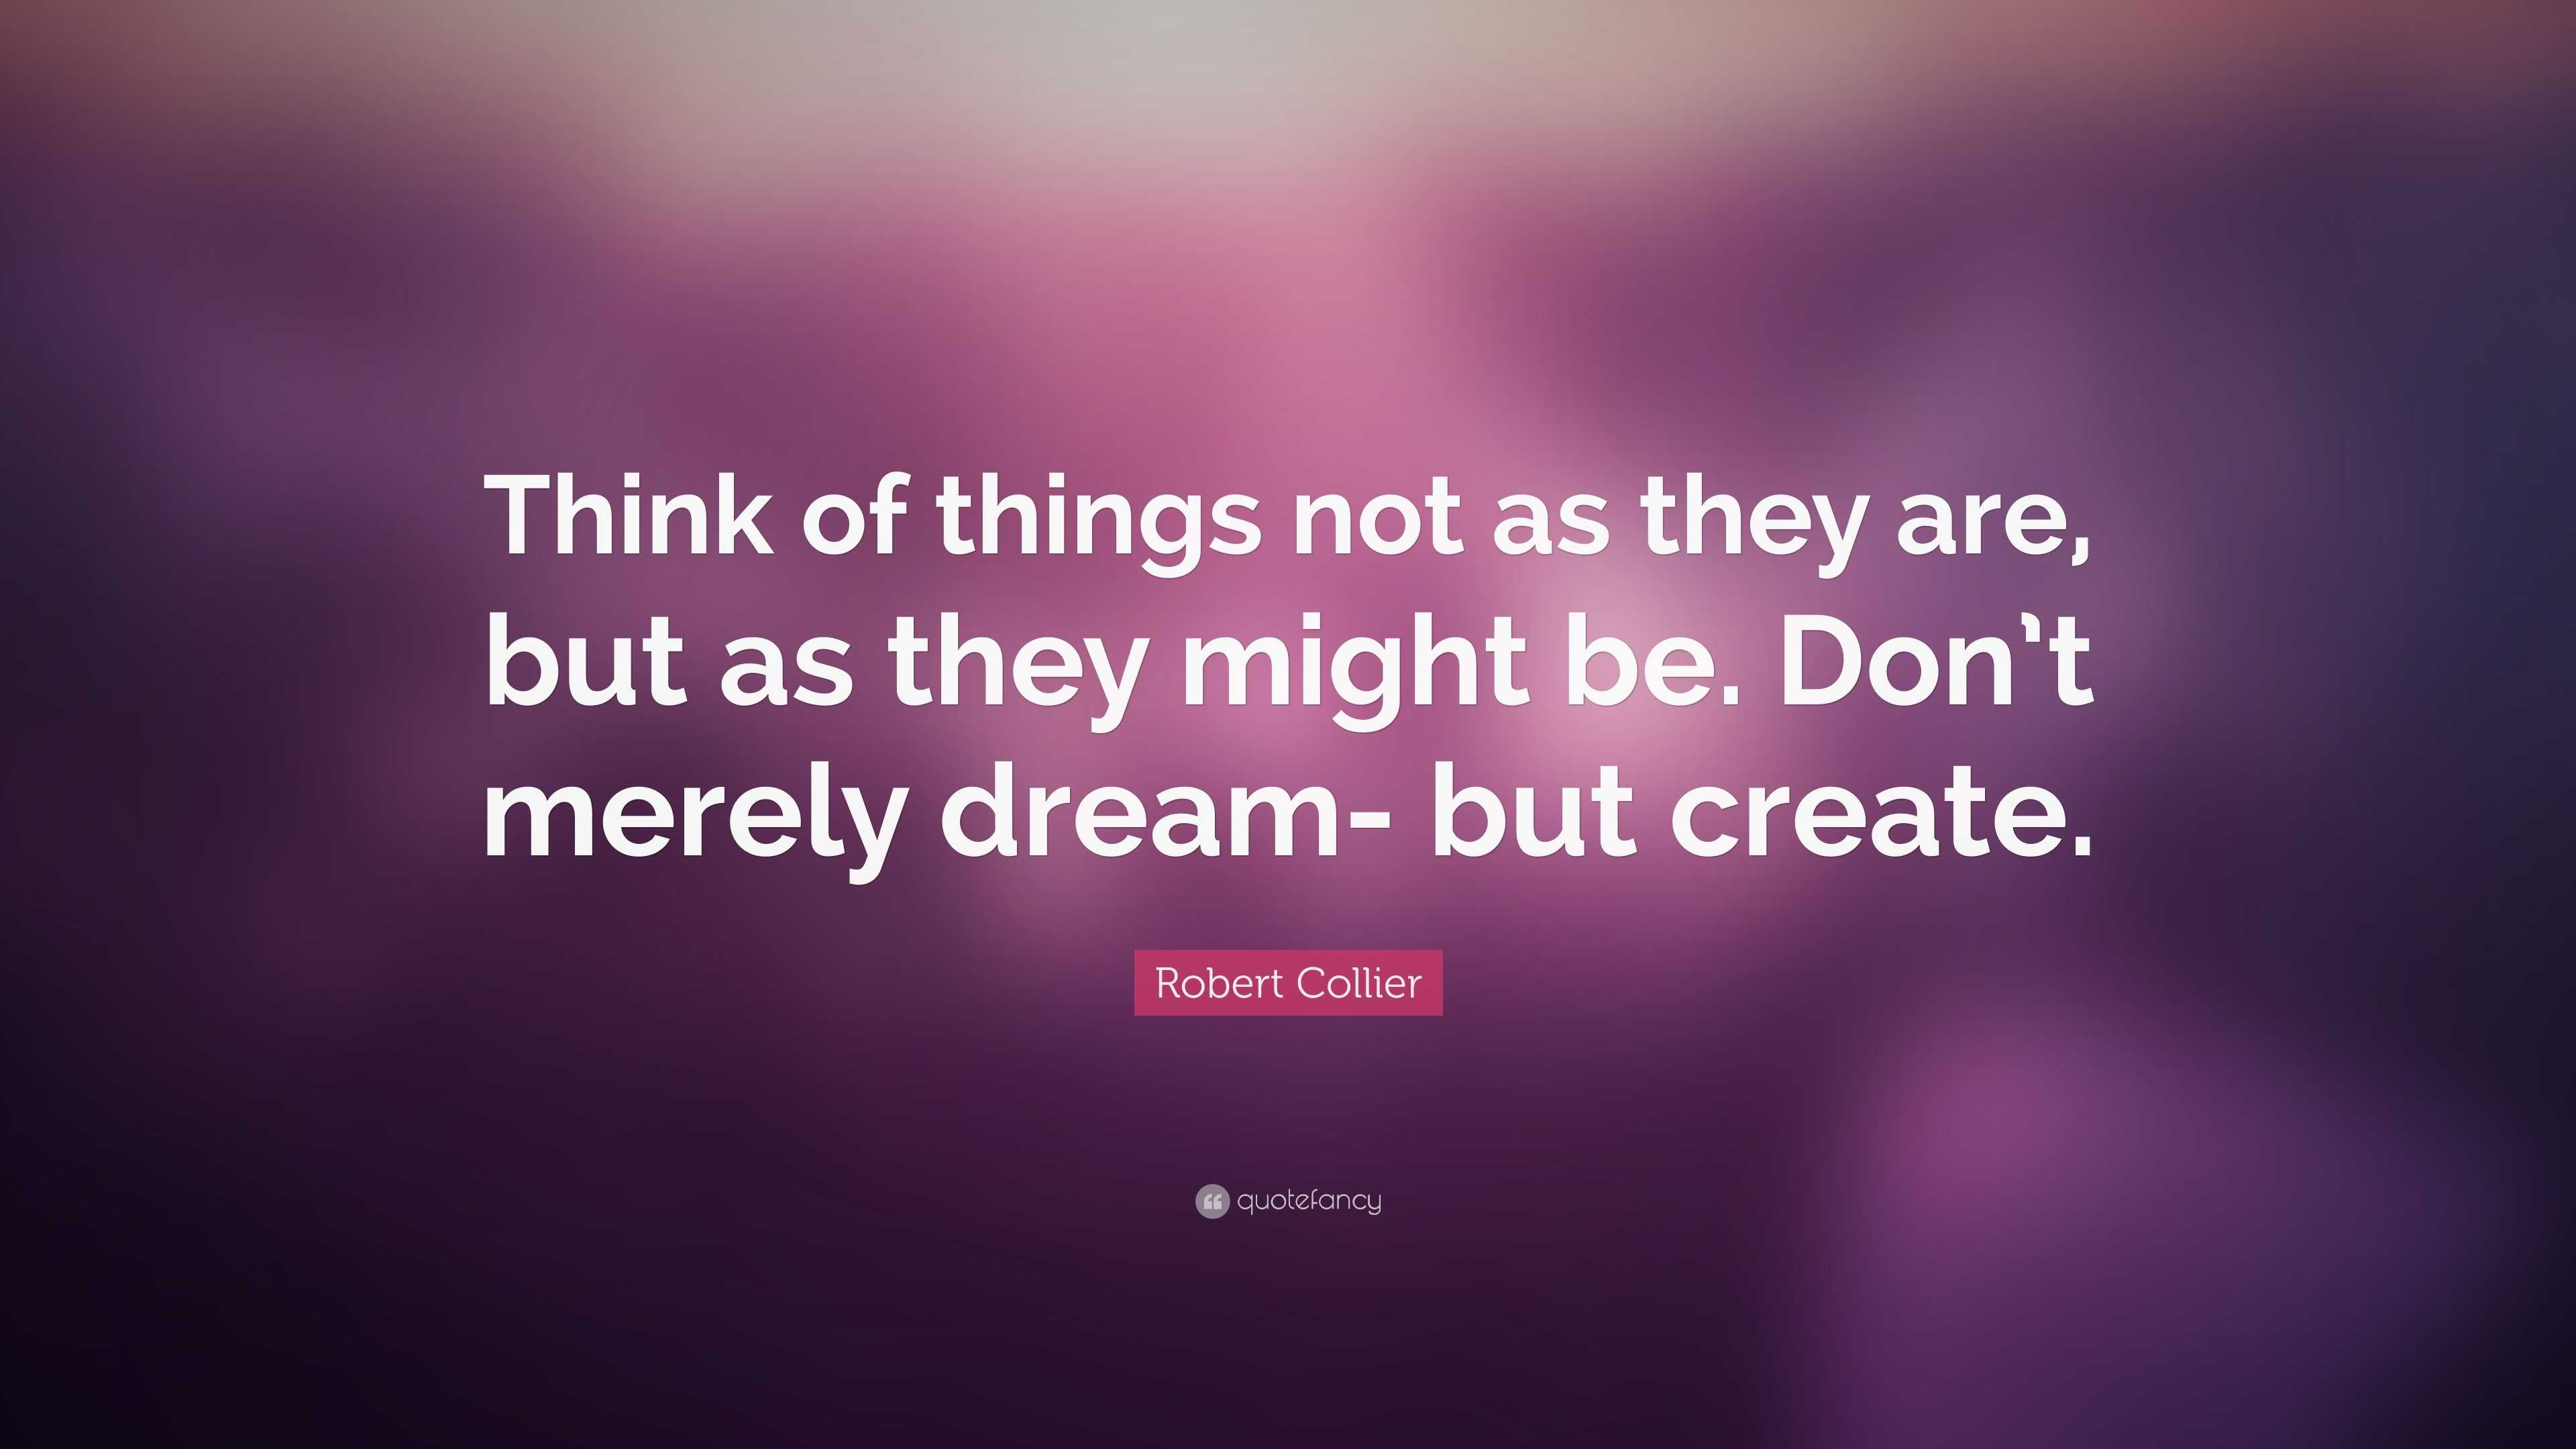 Robert Collier Quote: “Think of things not as they are, but as they ...